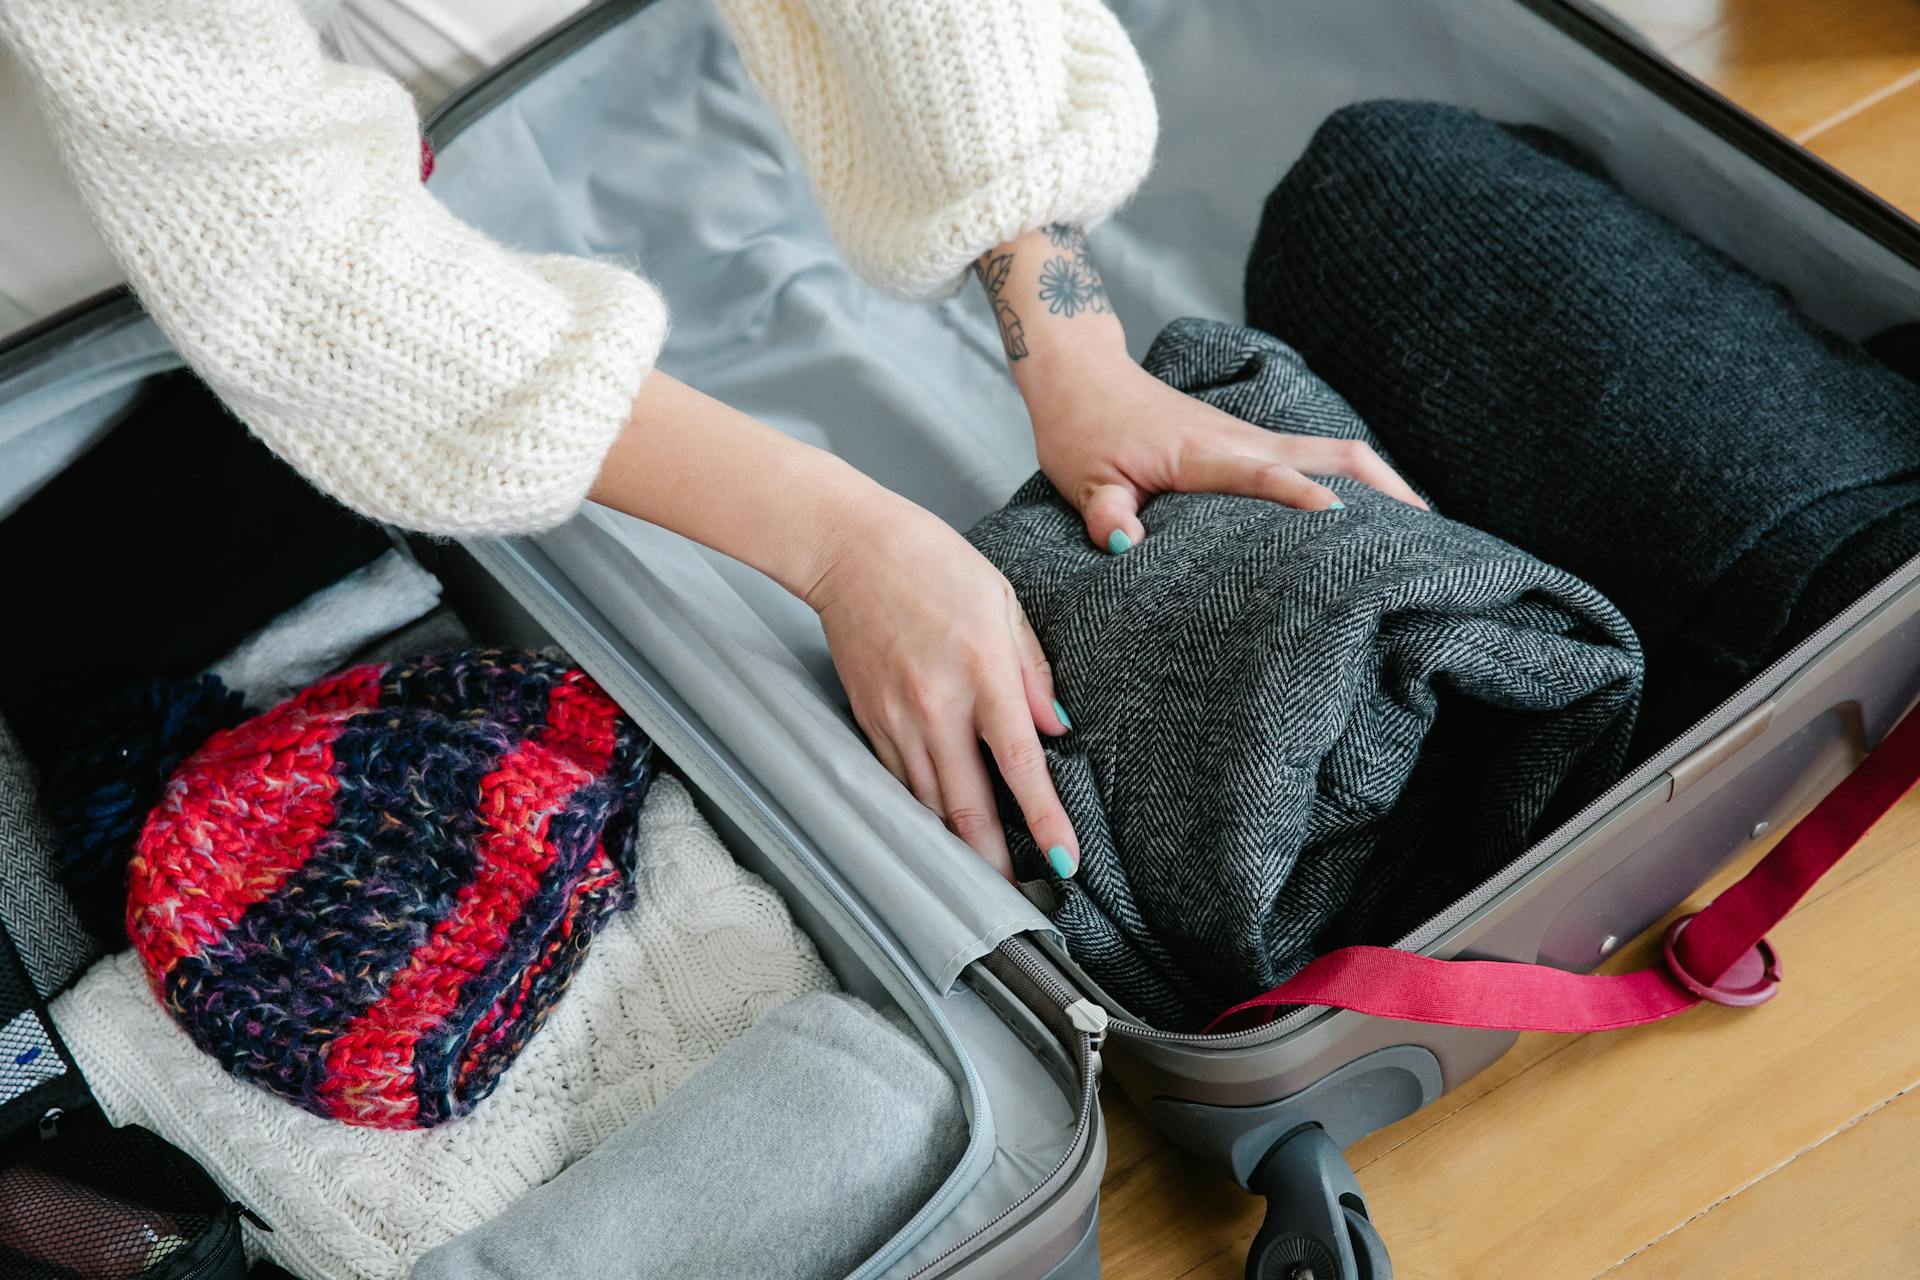 Sylvia packs her things and leaves the house with her three kids | Source: Pexels